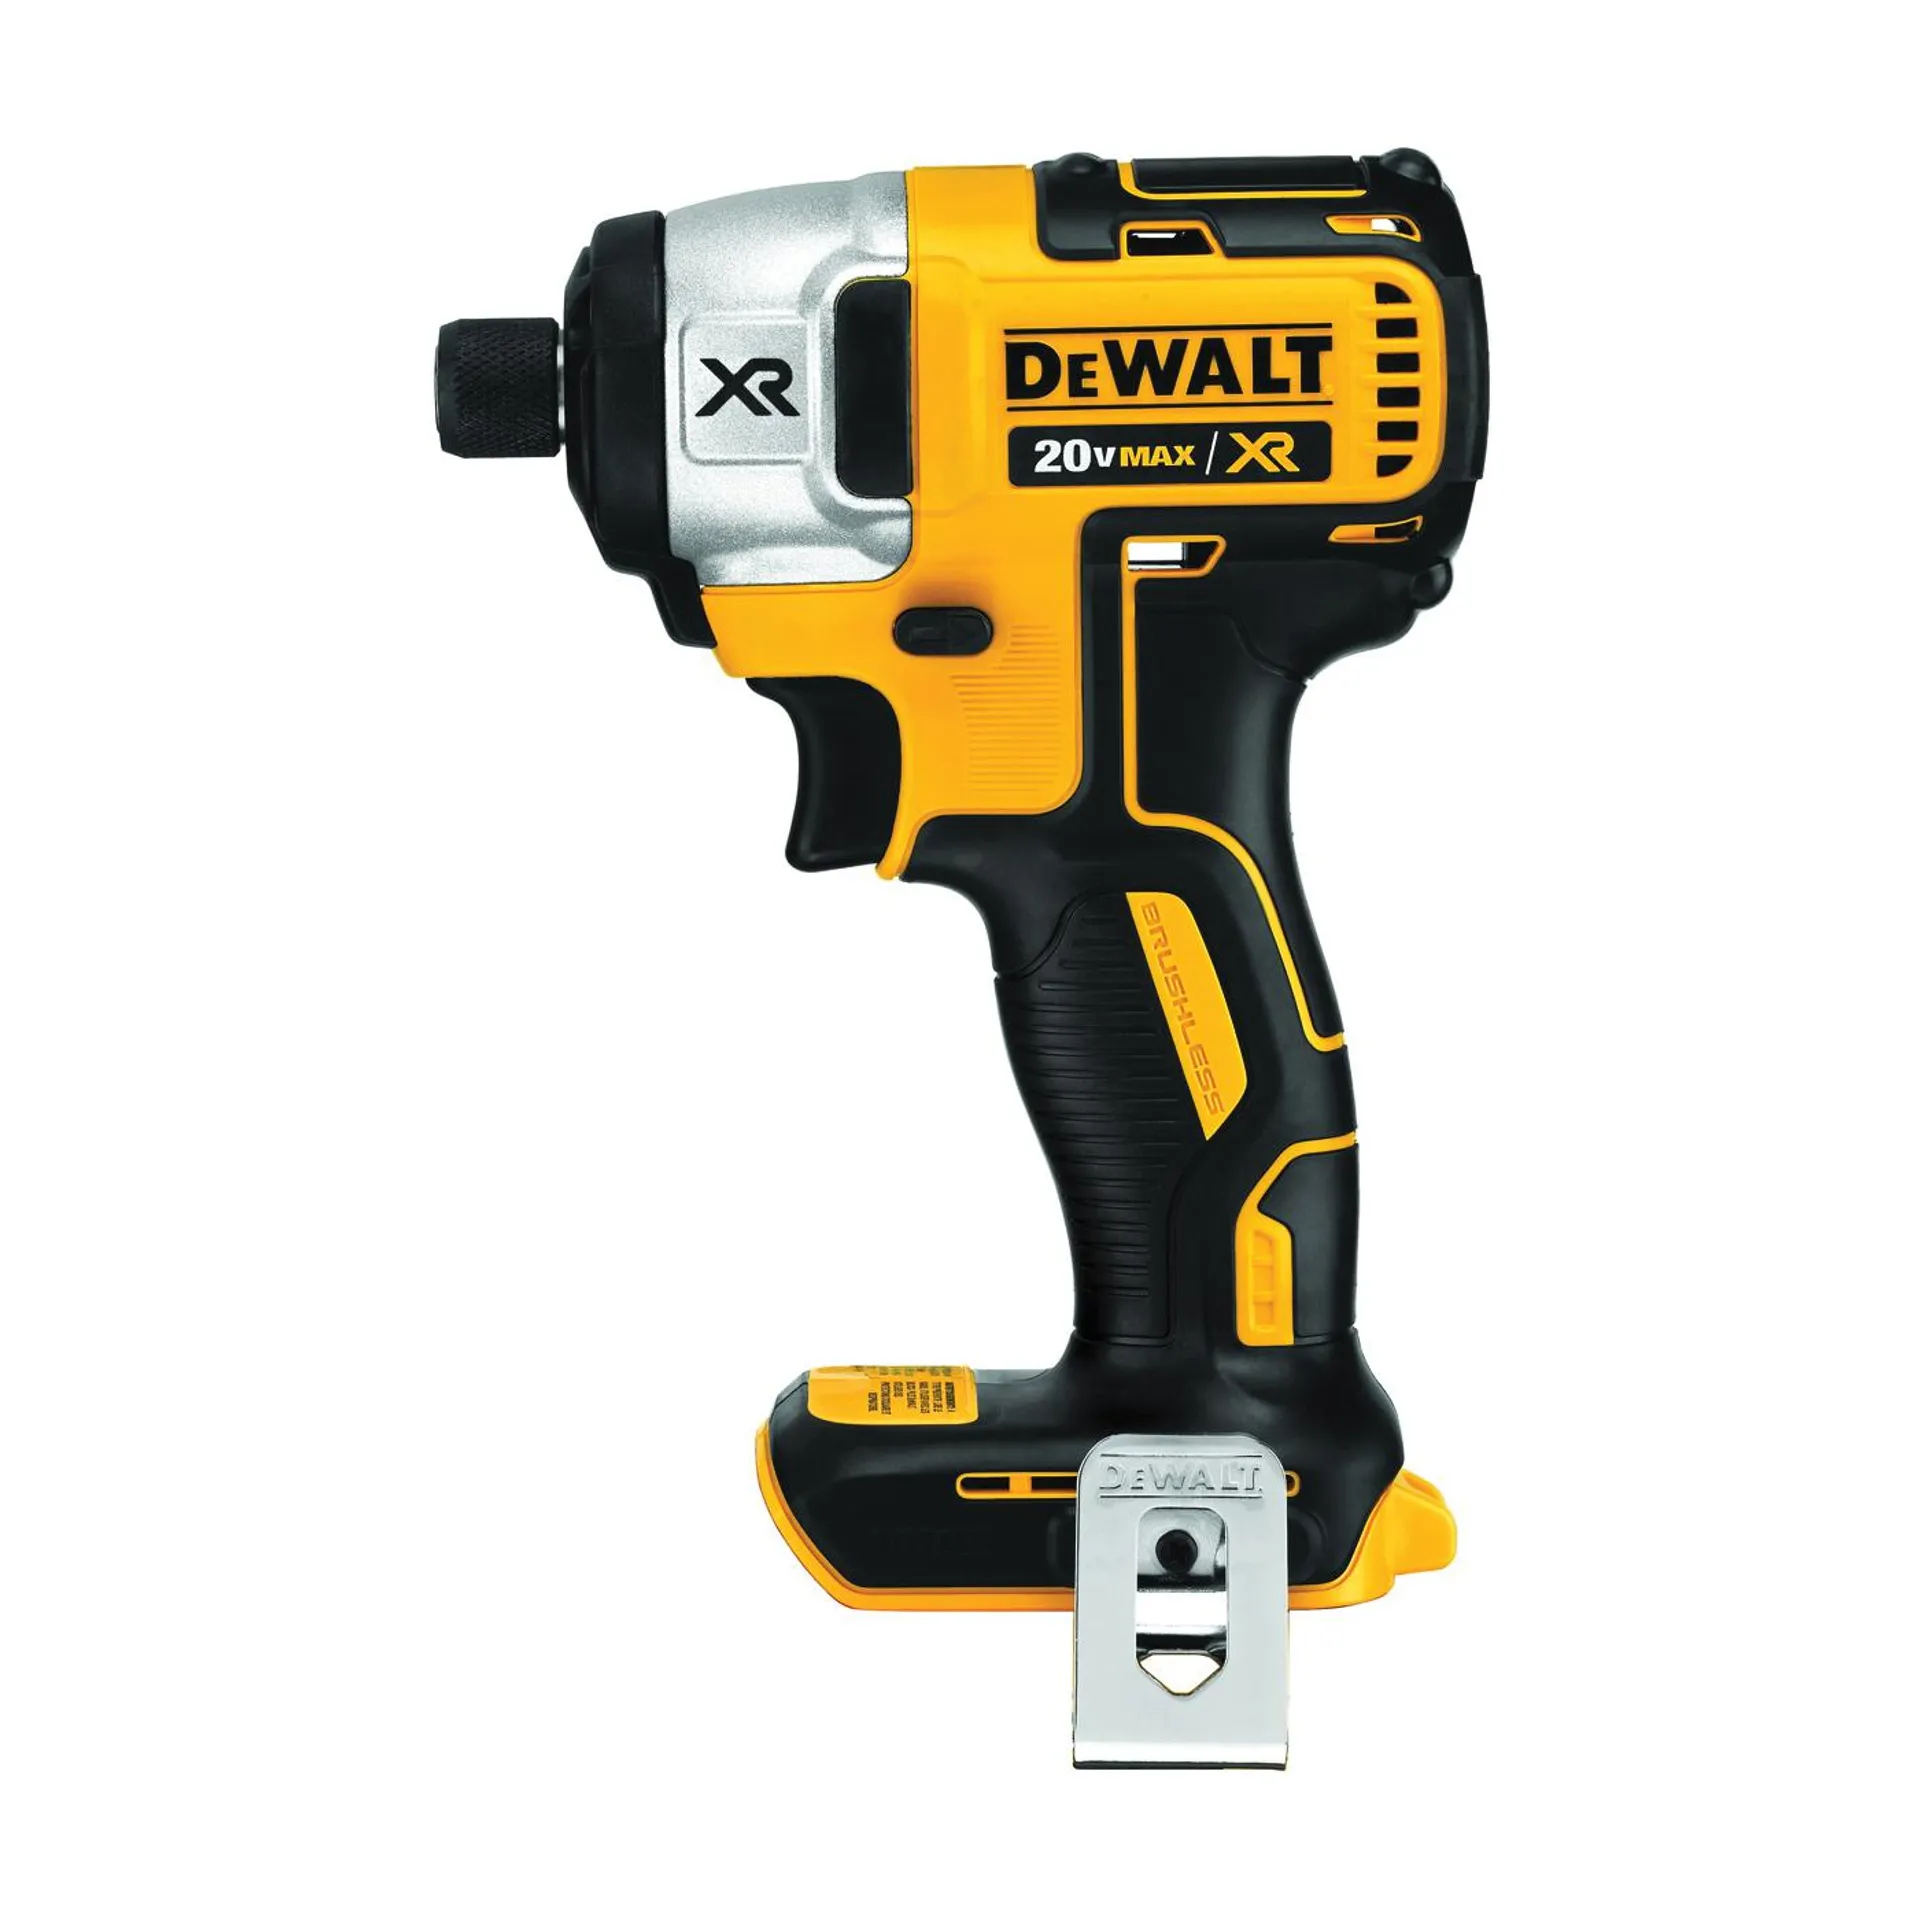 DCF887B/DCF886B Impact Driver, Tool Only, 20 V, 2 Ah, 1/4 in Drive, Hex Drive, 3800 ipm